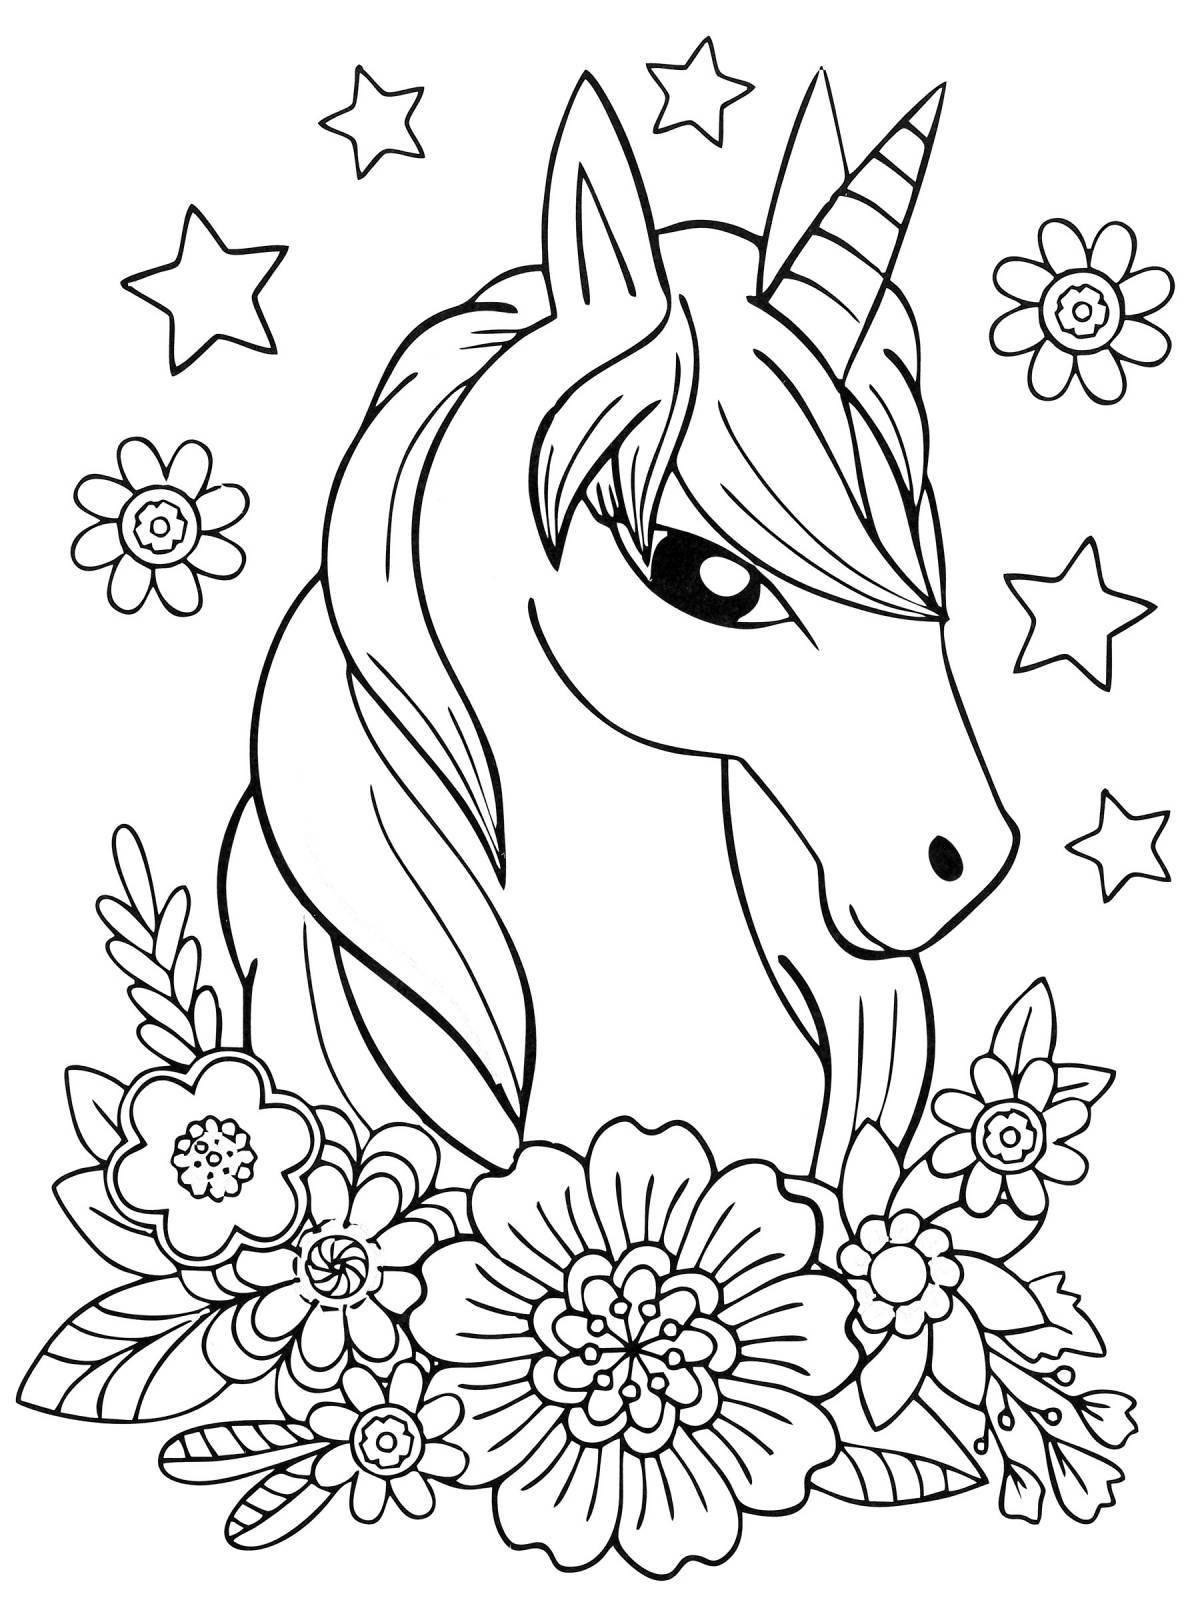 Cute coloring for girls 10 years old - very beautiful animals